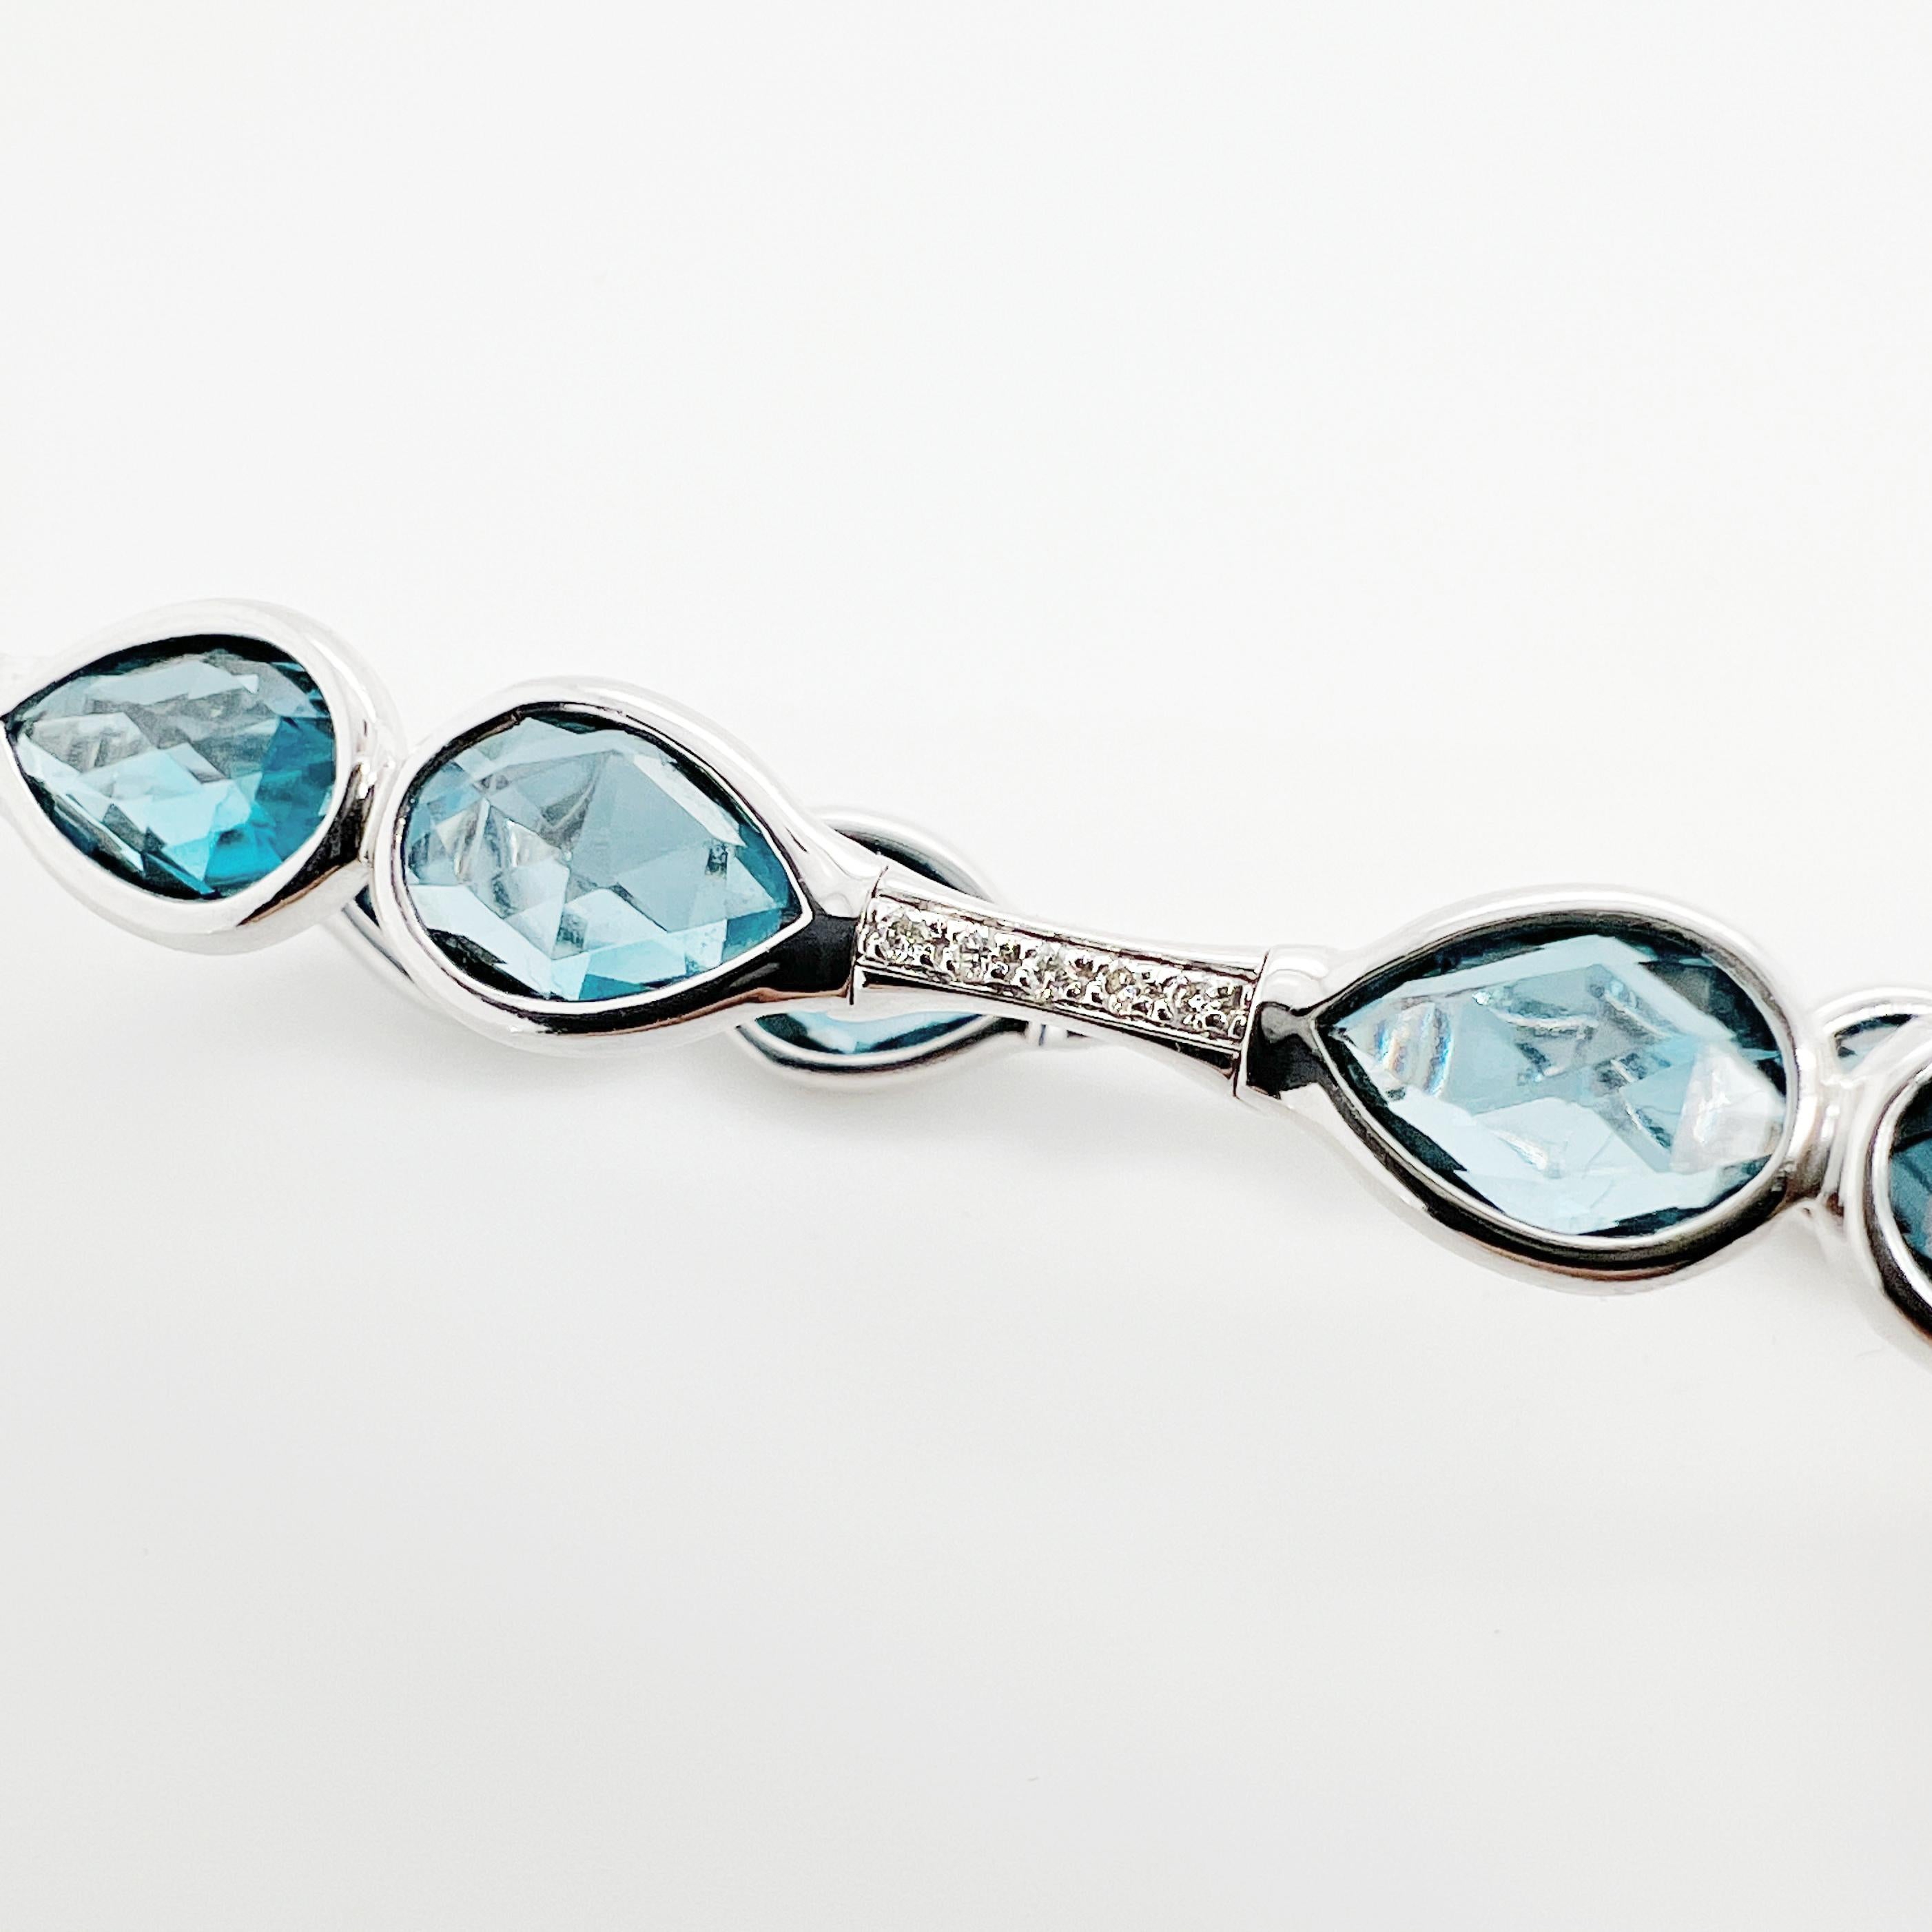 This bracelet is a  stunning combination of diamonds and blue topaz. The diamonds are expertly set within the intricate golden structure, providing a dazzling sparkle with every movement of the bracelet. The blue topaz gemstones add a vibrant pop of